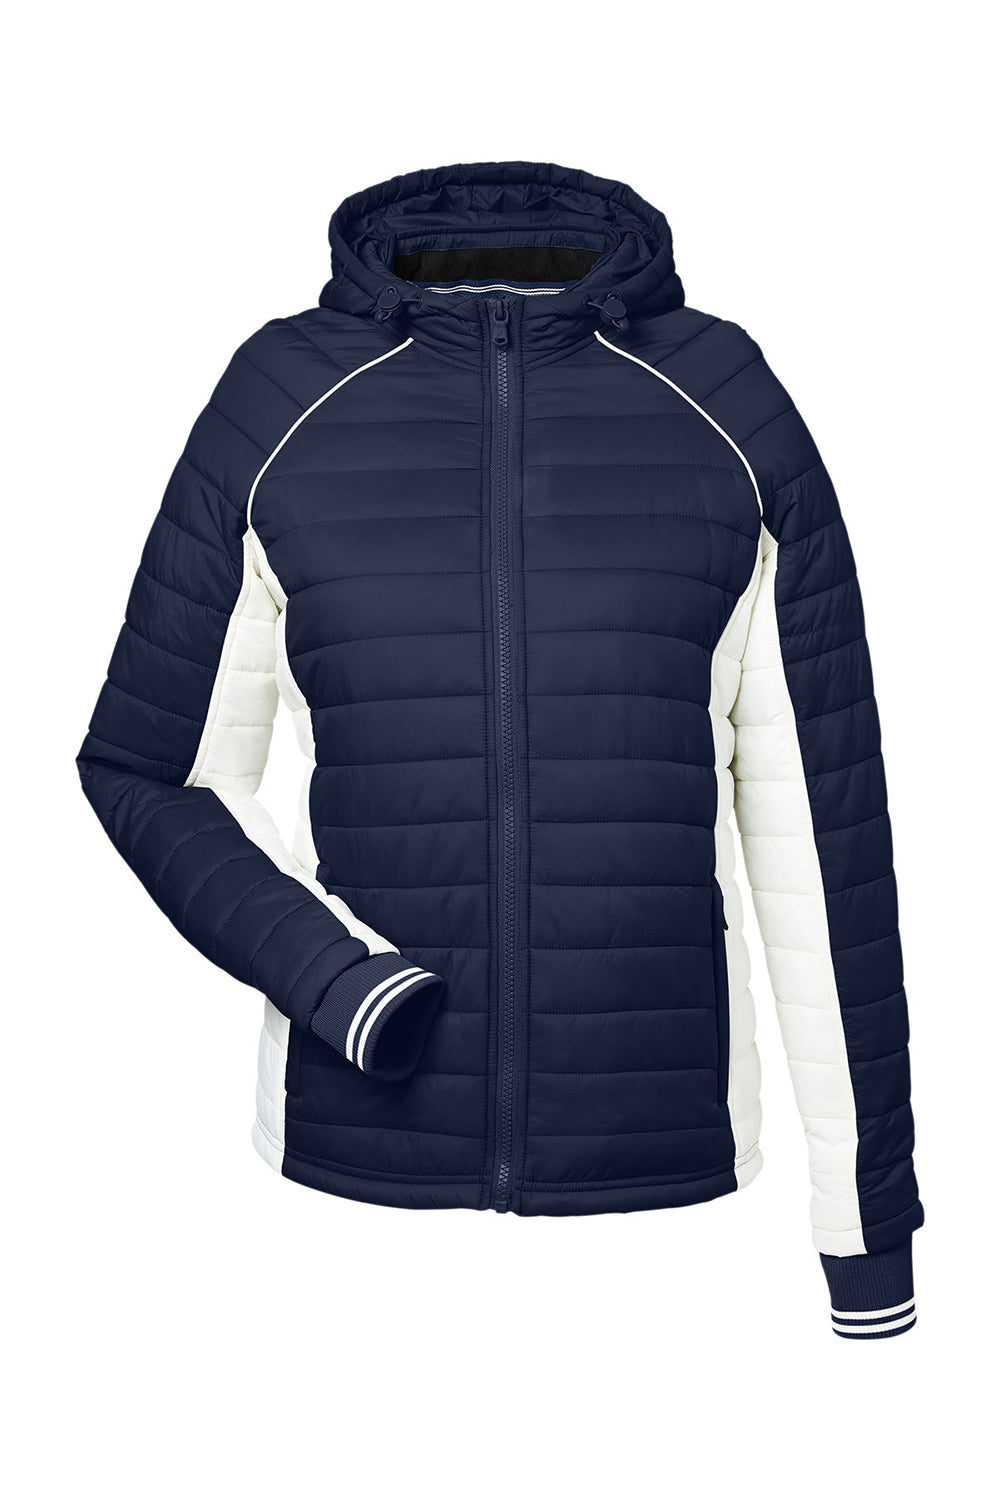 Nautica N17187 Womens Nautical Mile Packable Full Zip Hooded Puffer Jacket Night Navy Blue/Antique White Flat Front